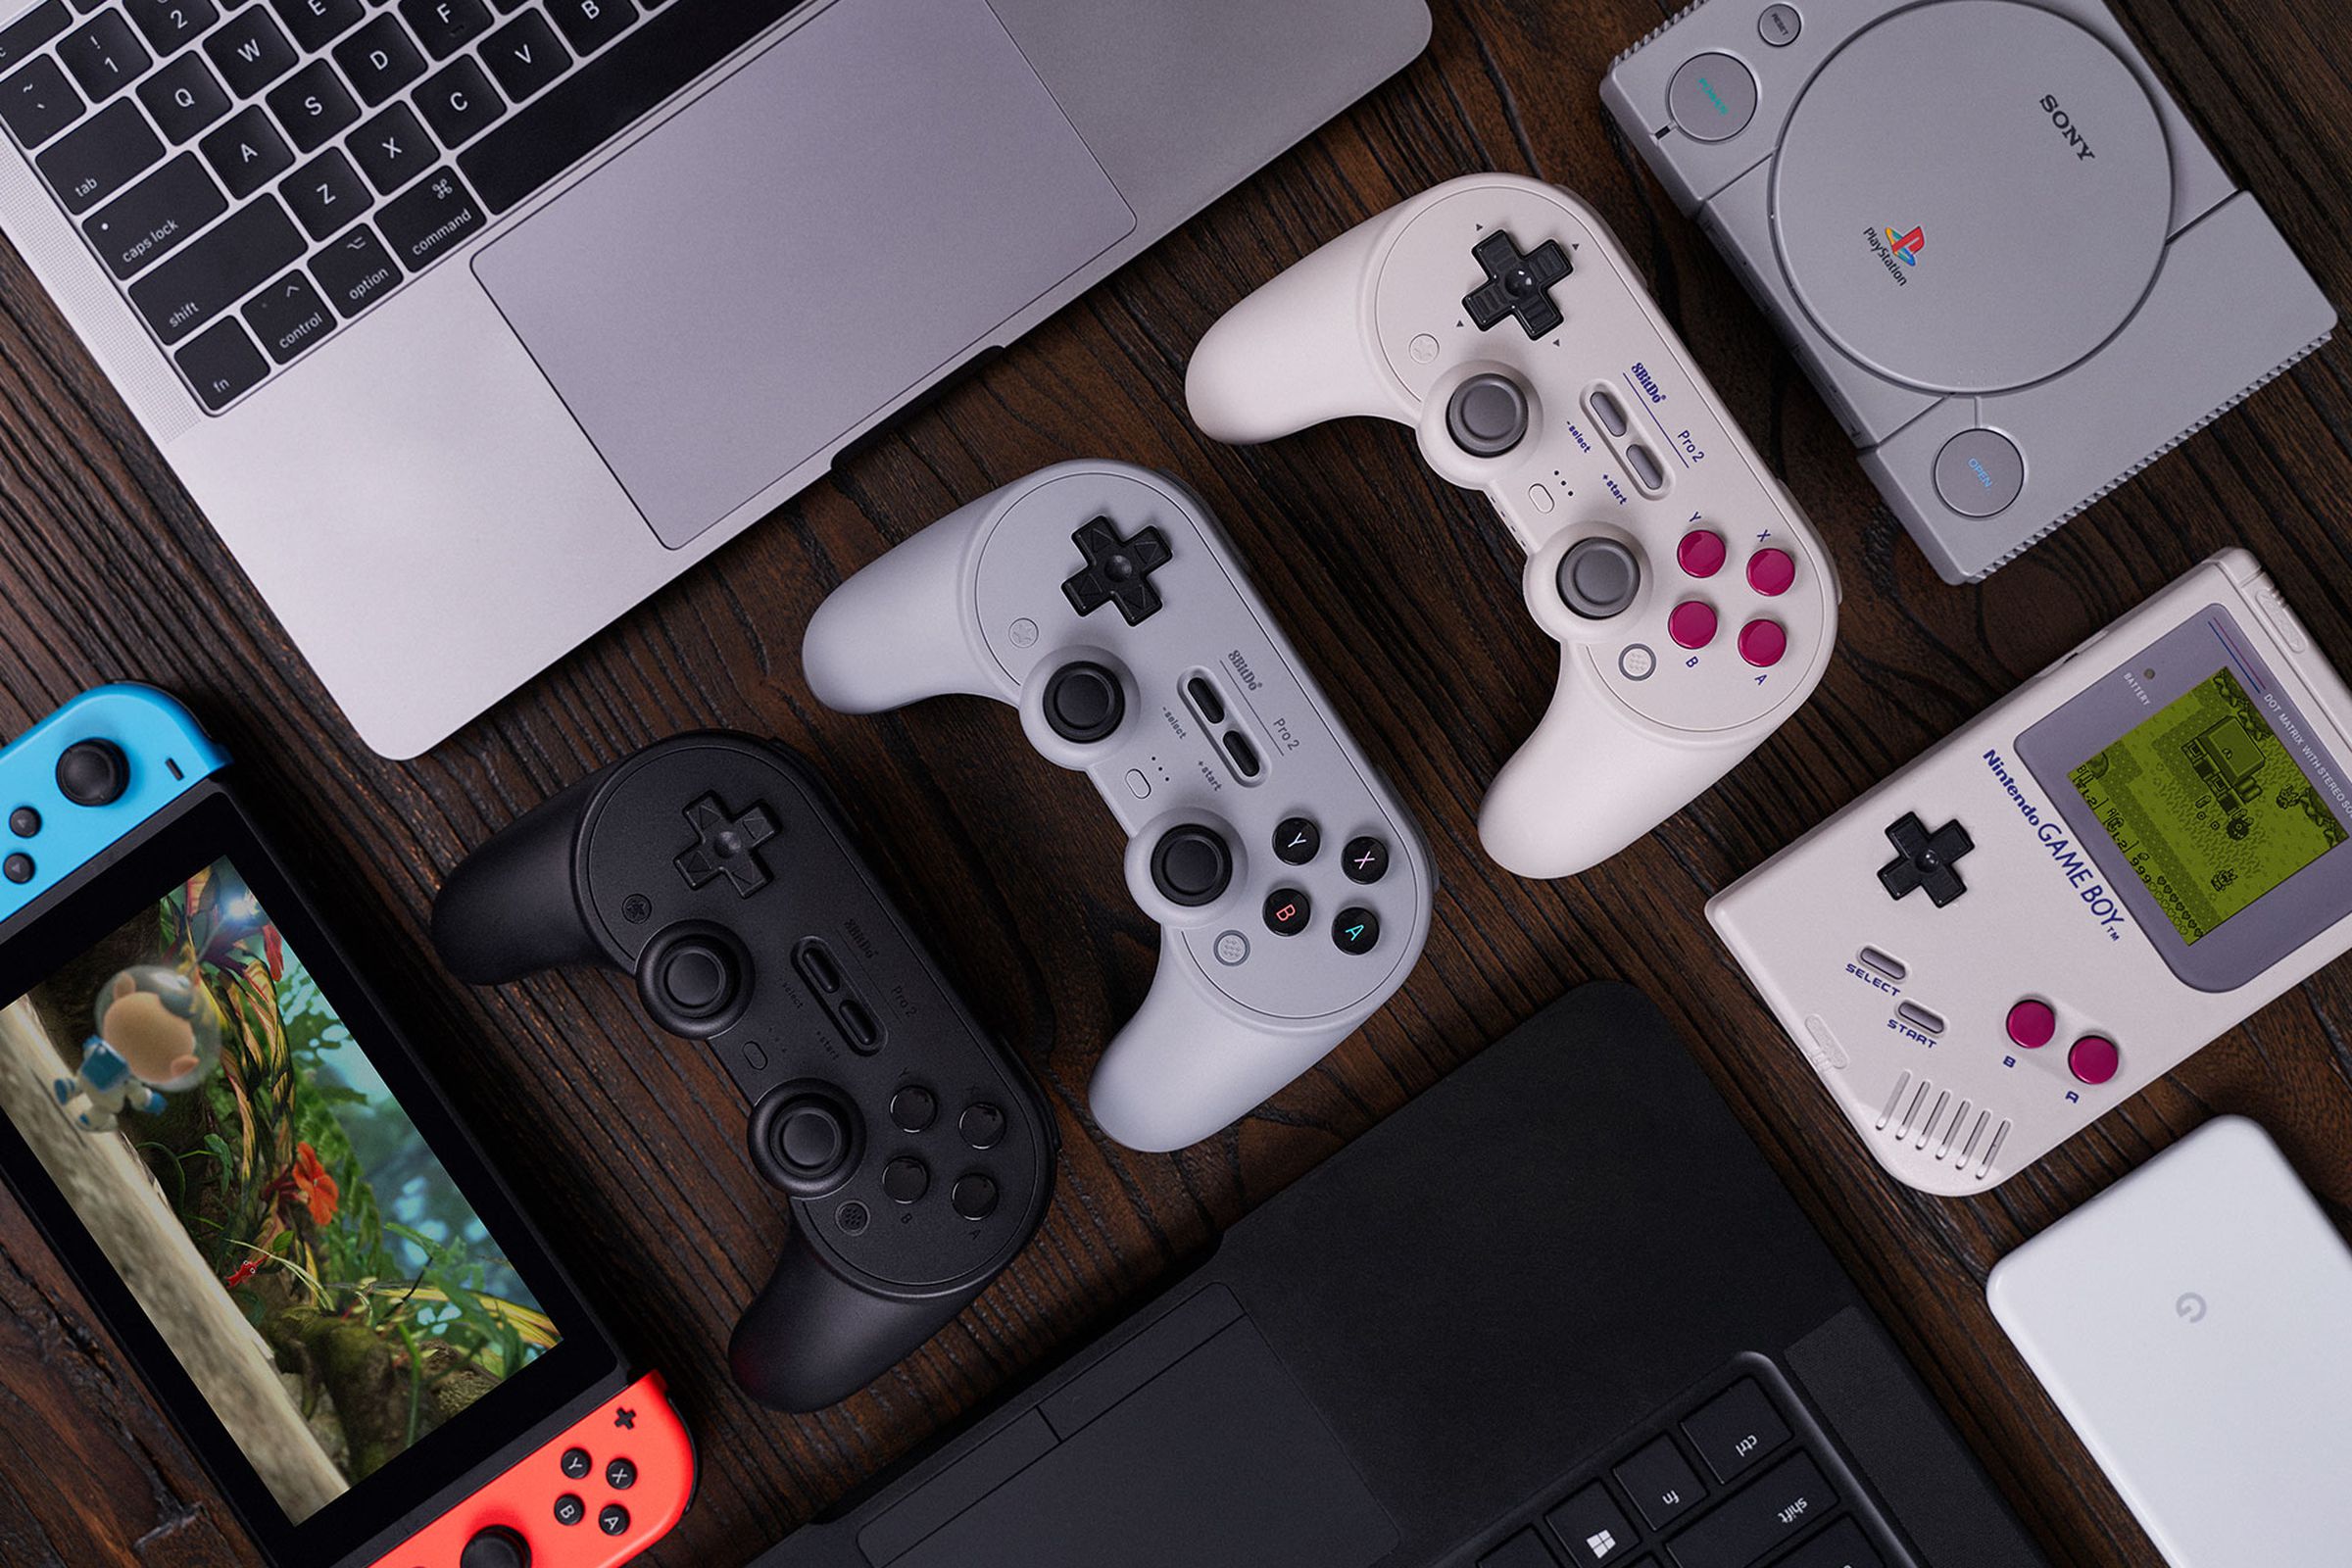 The Nintendo Switch, three controllers, a PlayStation console, and a Game Boy sits on a wooden desk near a laptop.